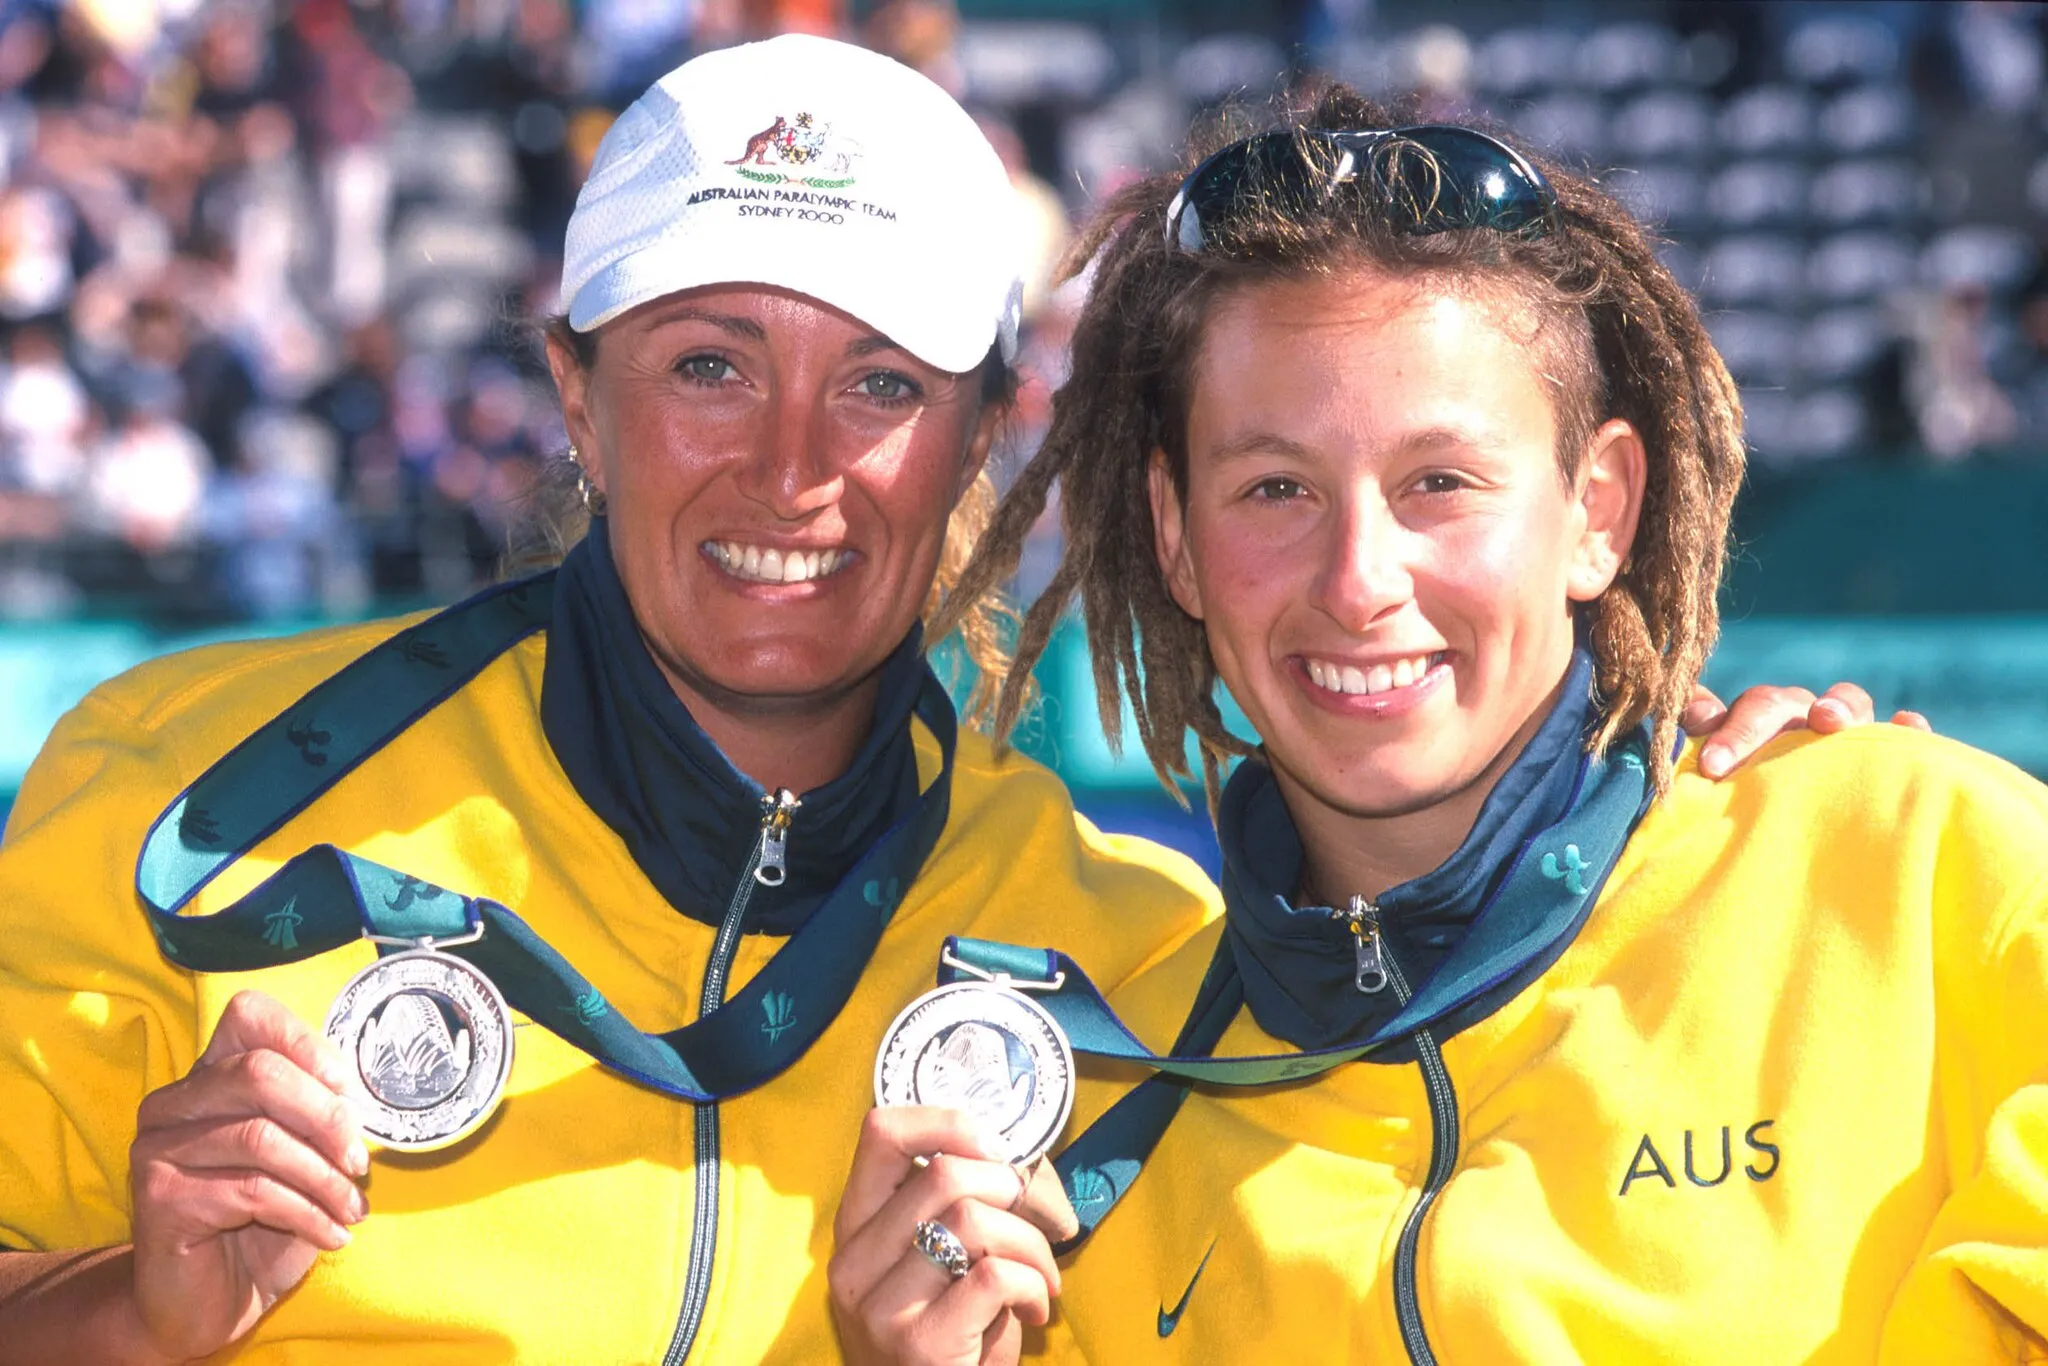 Photo showing: Australian wheelchair tennis players Daniela Di Toro and Branka Pupovac smiling as they show their gold medals, won at the Women's Doubles 2000 Sydney Paralympics